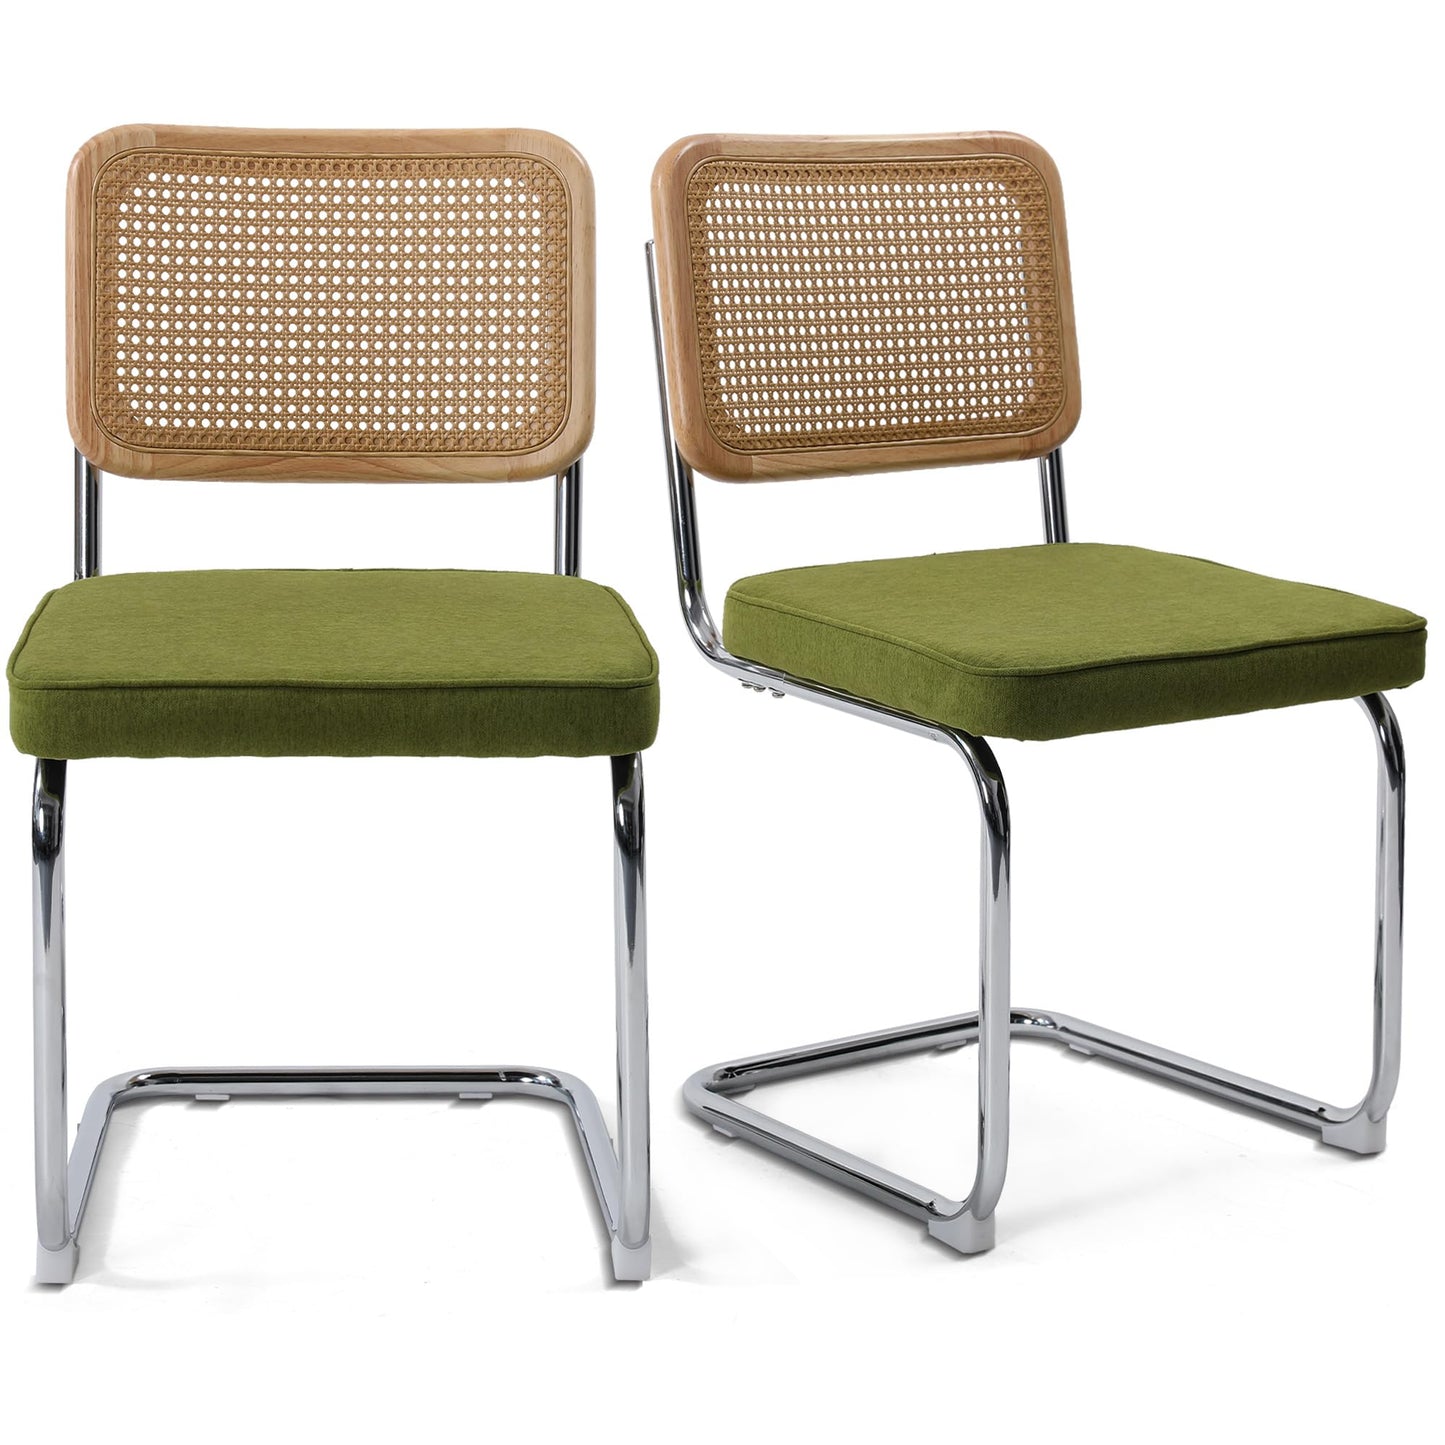 KROFEM 31.5" Modern Cesca Cane Dining Chairs, Set of 2, Handwoven Rattan Cane Back, Chrome Base, Upholstered Cotton Seat, Ideal for Kitchen or Dining Room, Green